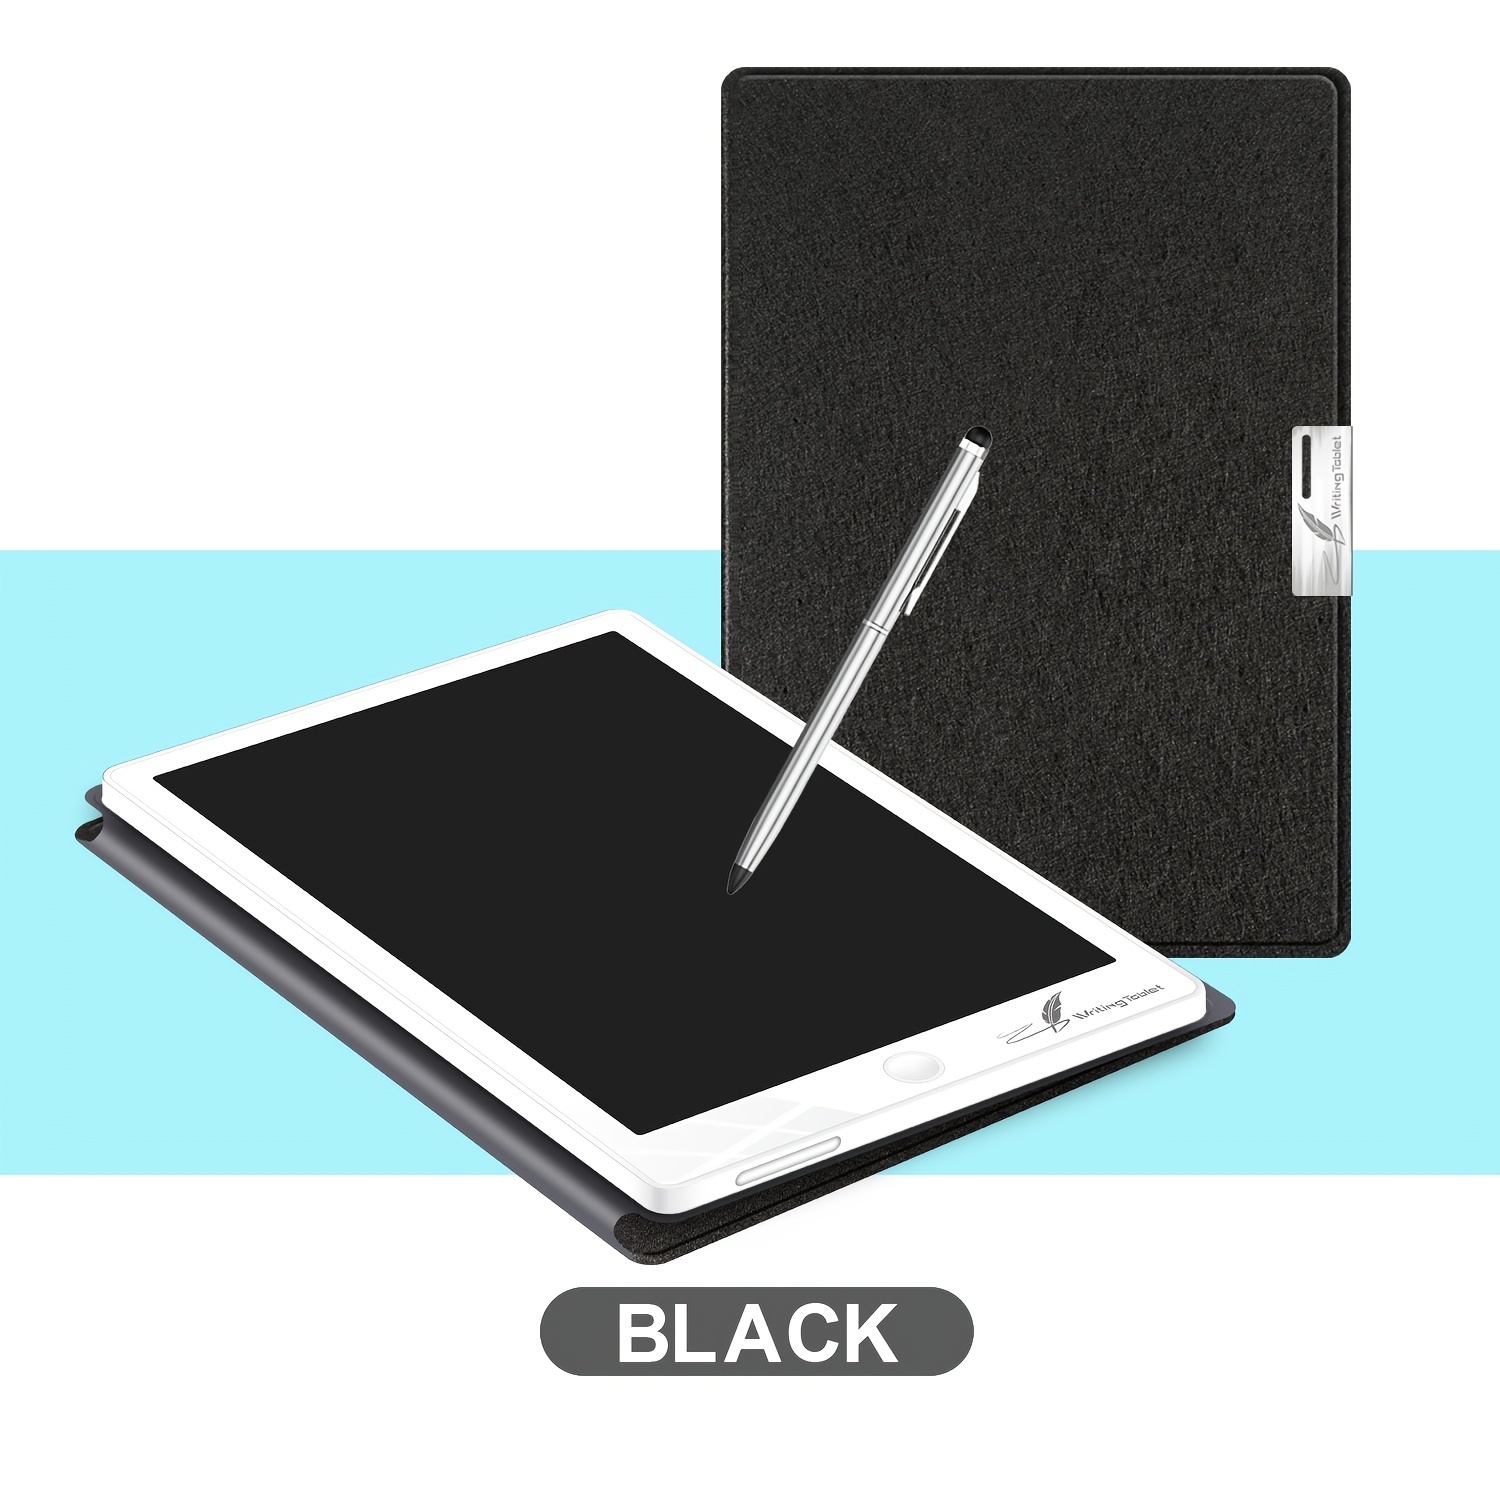 Electronic Note Book Lcd Writing Tablet With Leather Case - Temu